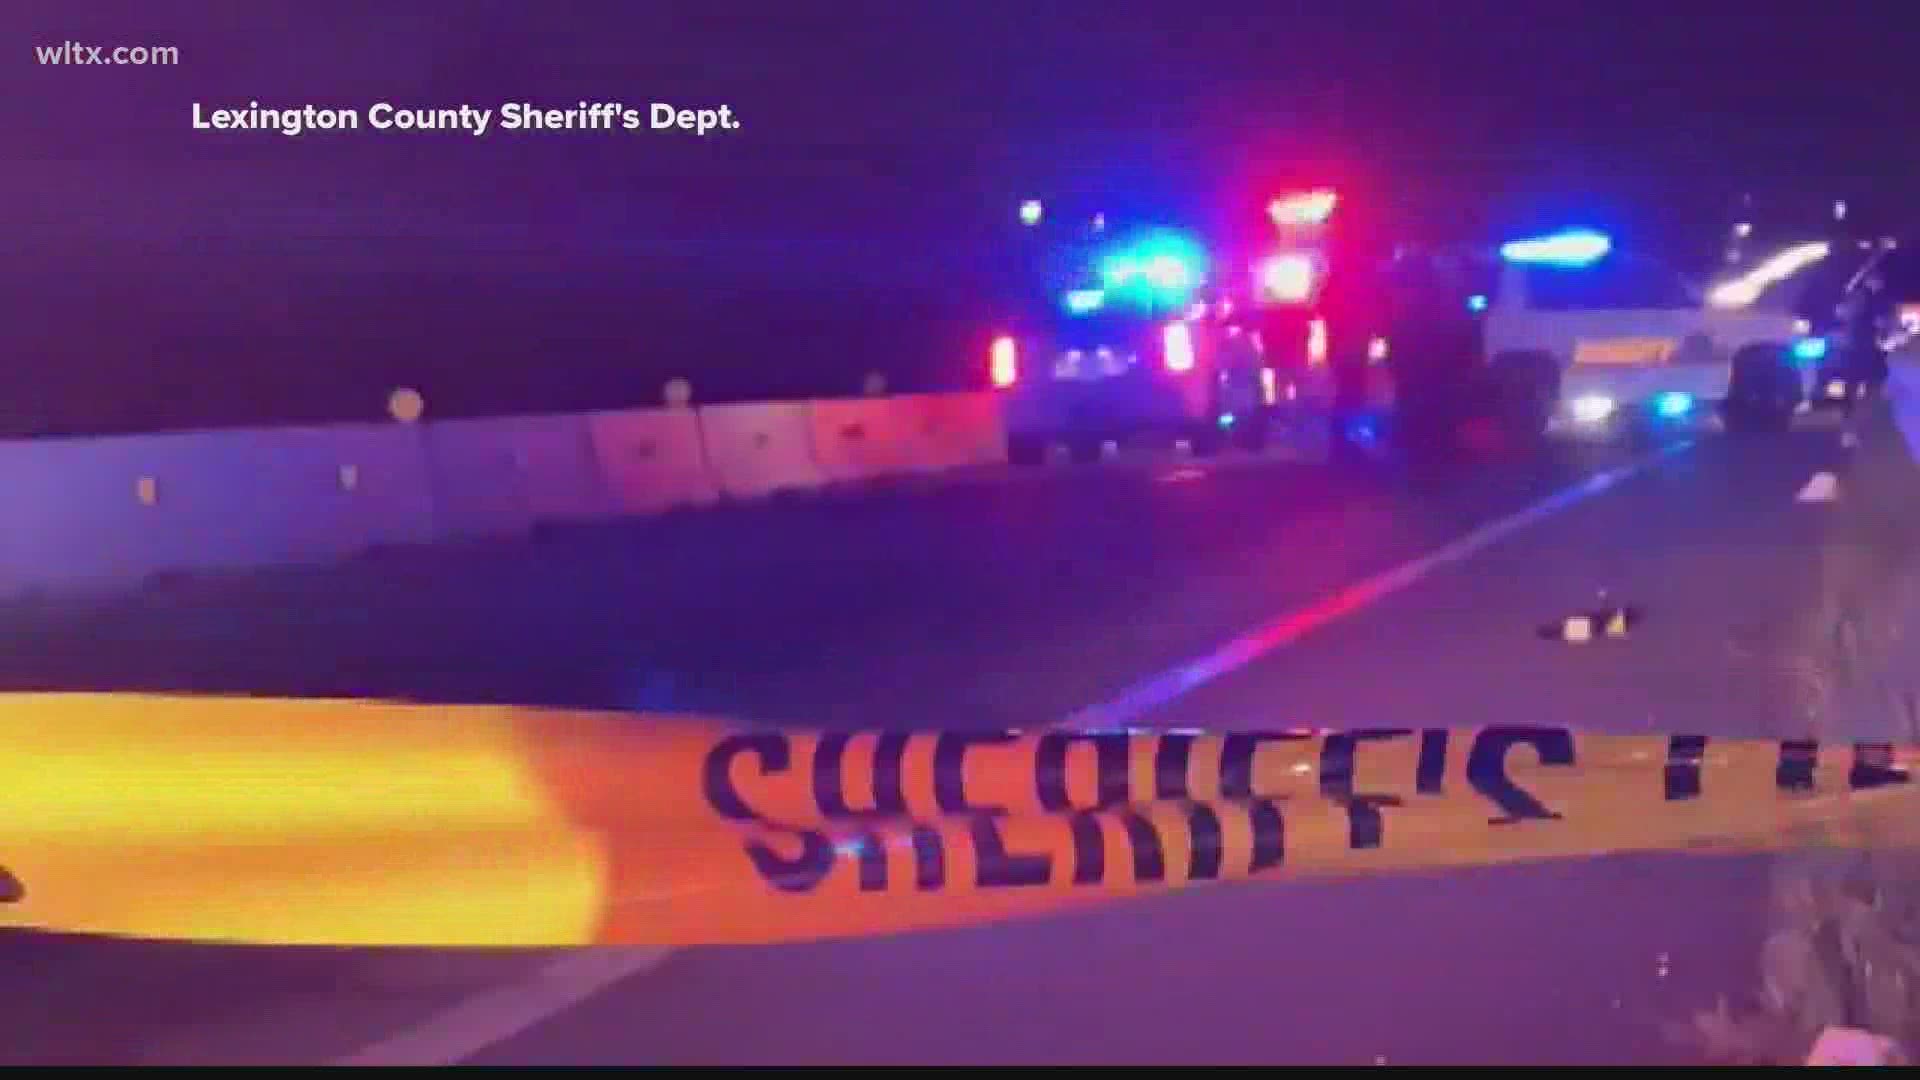 Lexington County deputies say a man was found dead on Interstate 20 Tuesday night, leading to an investigation and closing the road for just over an hour.